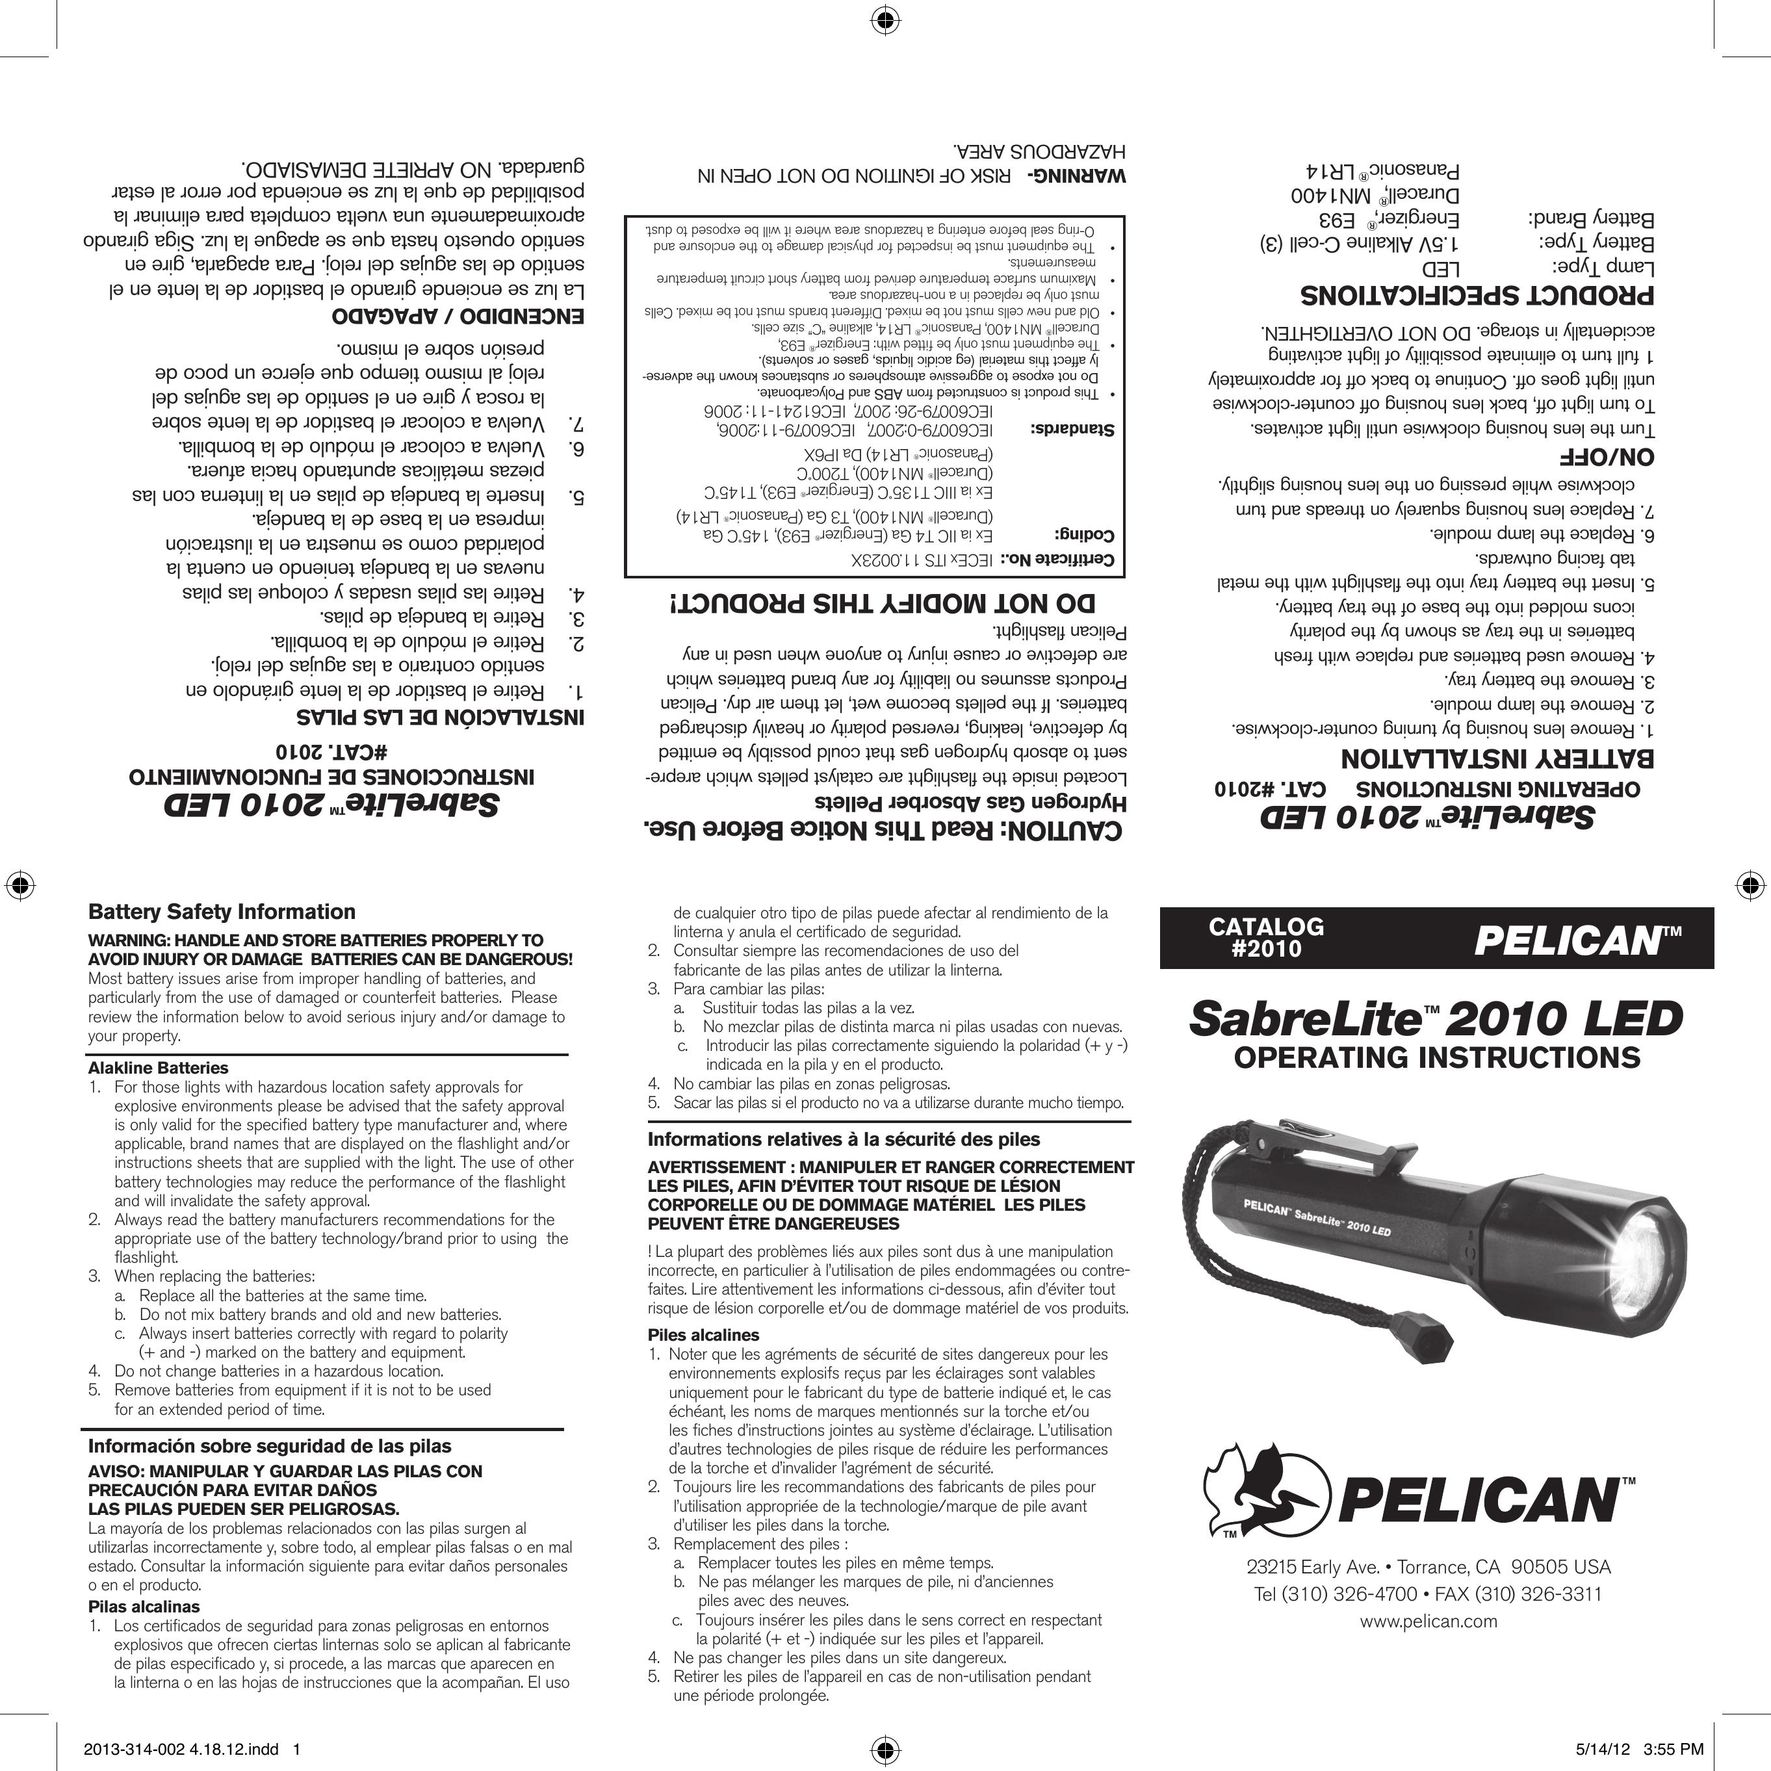 Pelican 2010 LED Home Safety Product User Manual